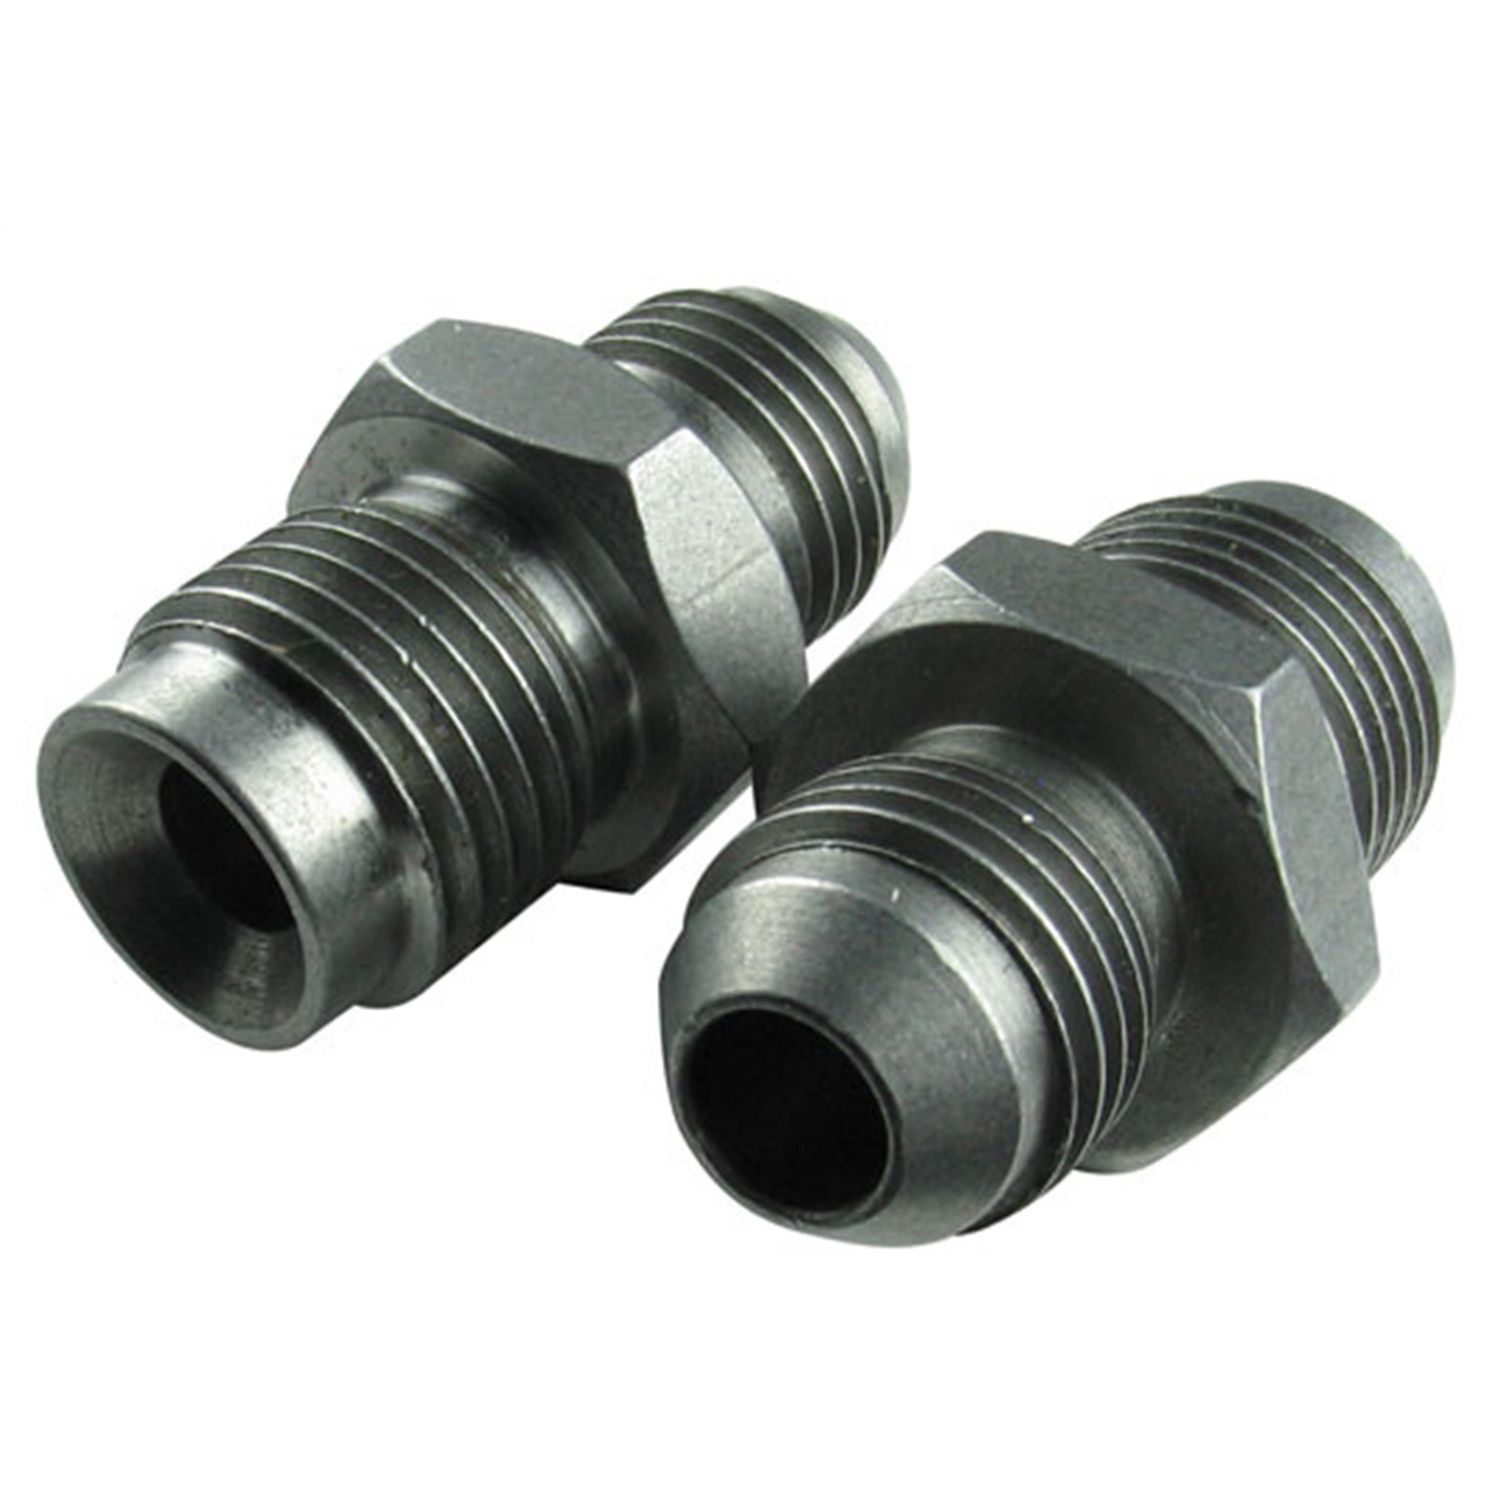 Borgeson - AN Hose Adapters - P/N: 925121 - Power Steering Hose Adapter Set. Adapts Borgeson Ford power conversion box to a -6AN for custom hose applications. Stainless Steel. -6AN to 16MM X 1.5 Flare.